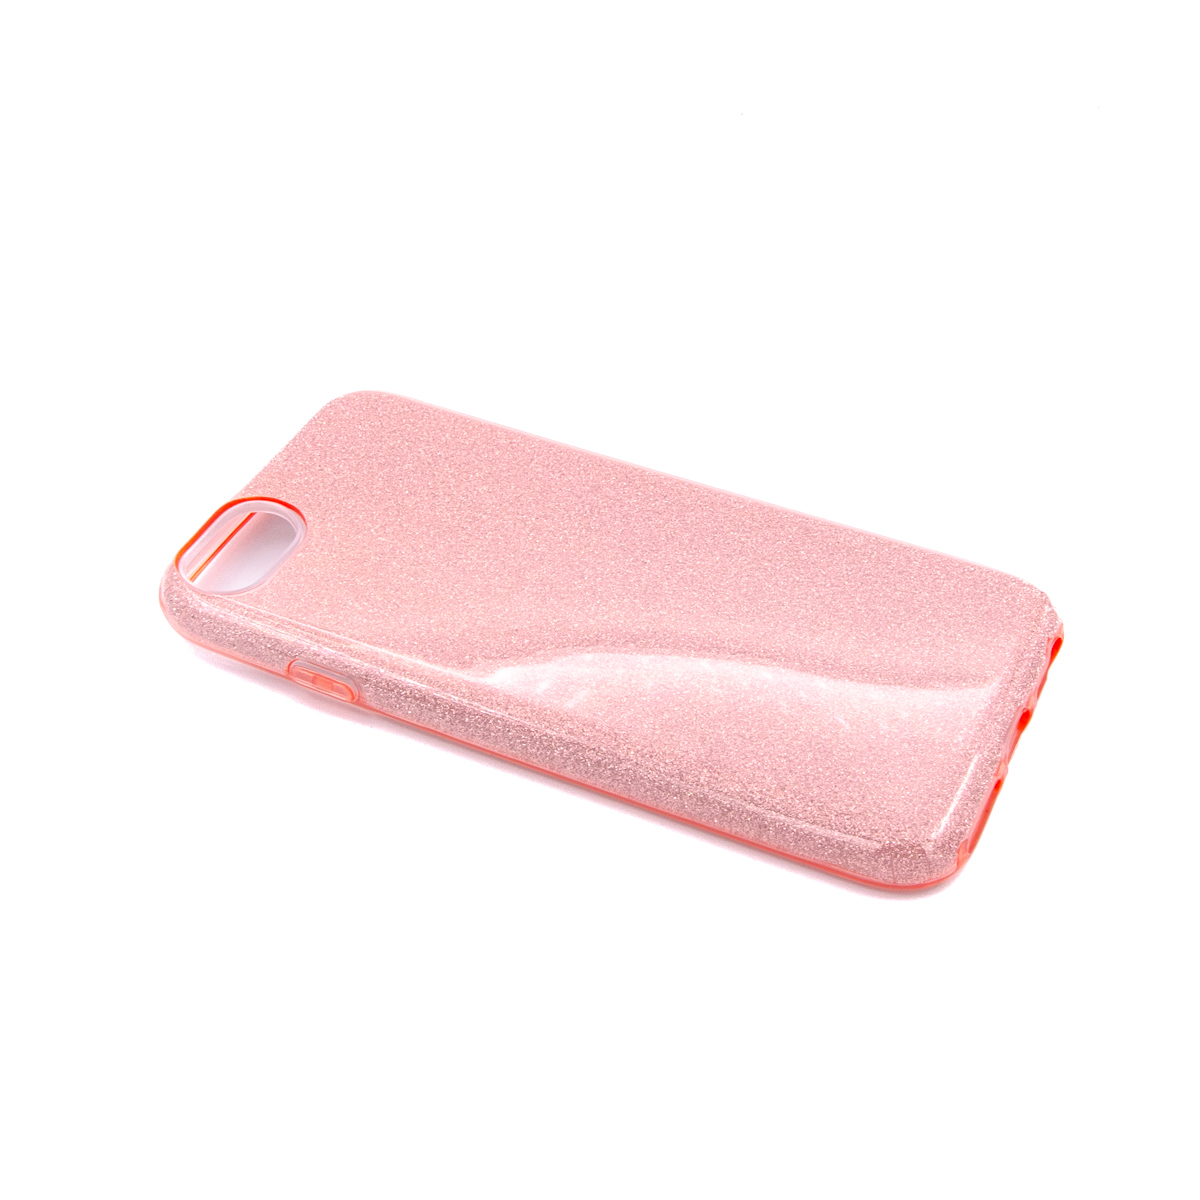 Tpu sparkly shine for iphone se 2020 4.7 pink